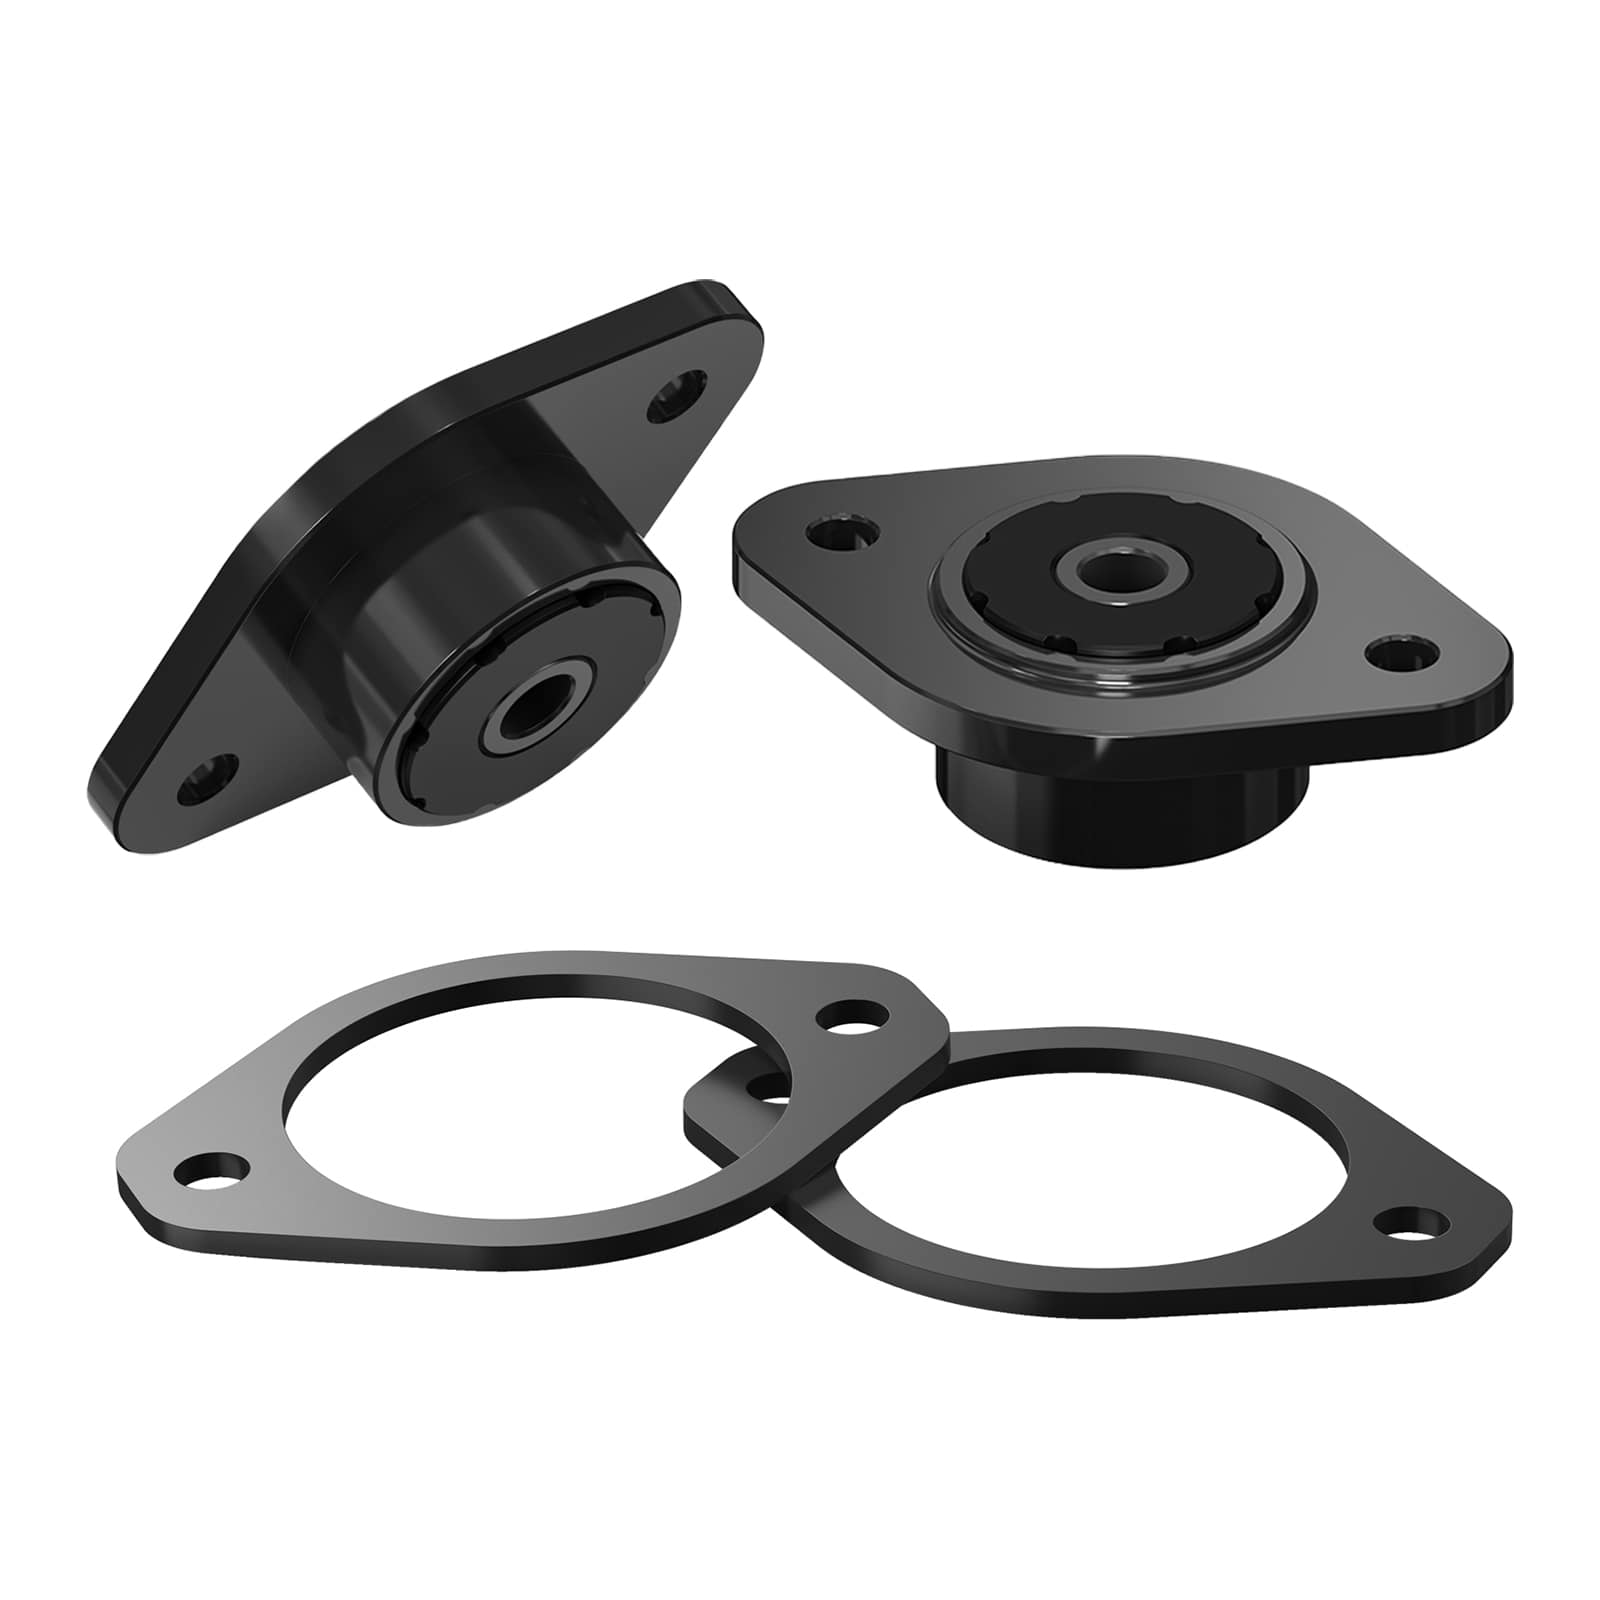 Bevinsee Complete Rear Upper Polyurethane Shock Mounting Kit For BMW E30 E36 E46 Z3 Z4